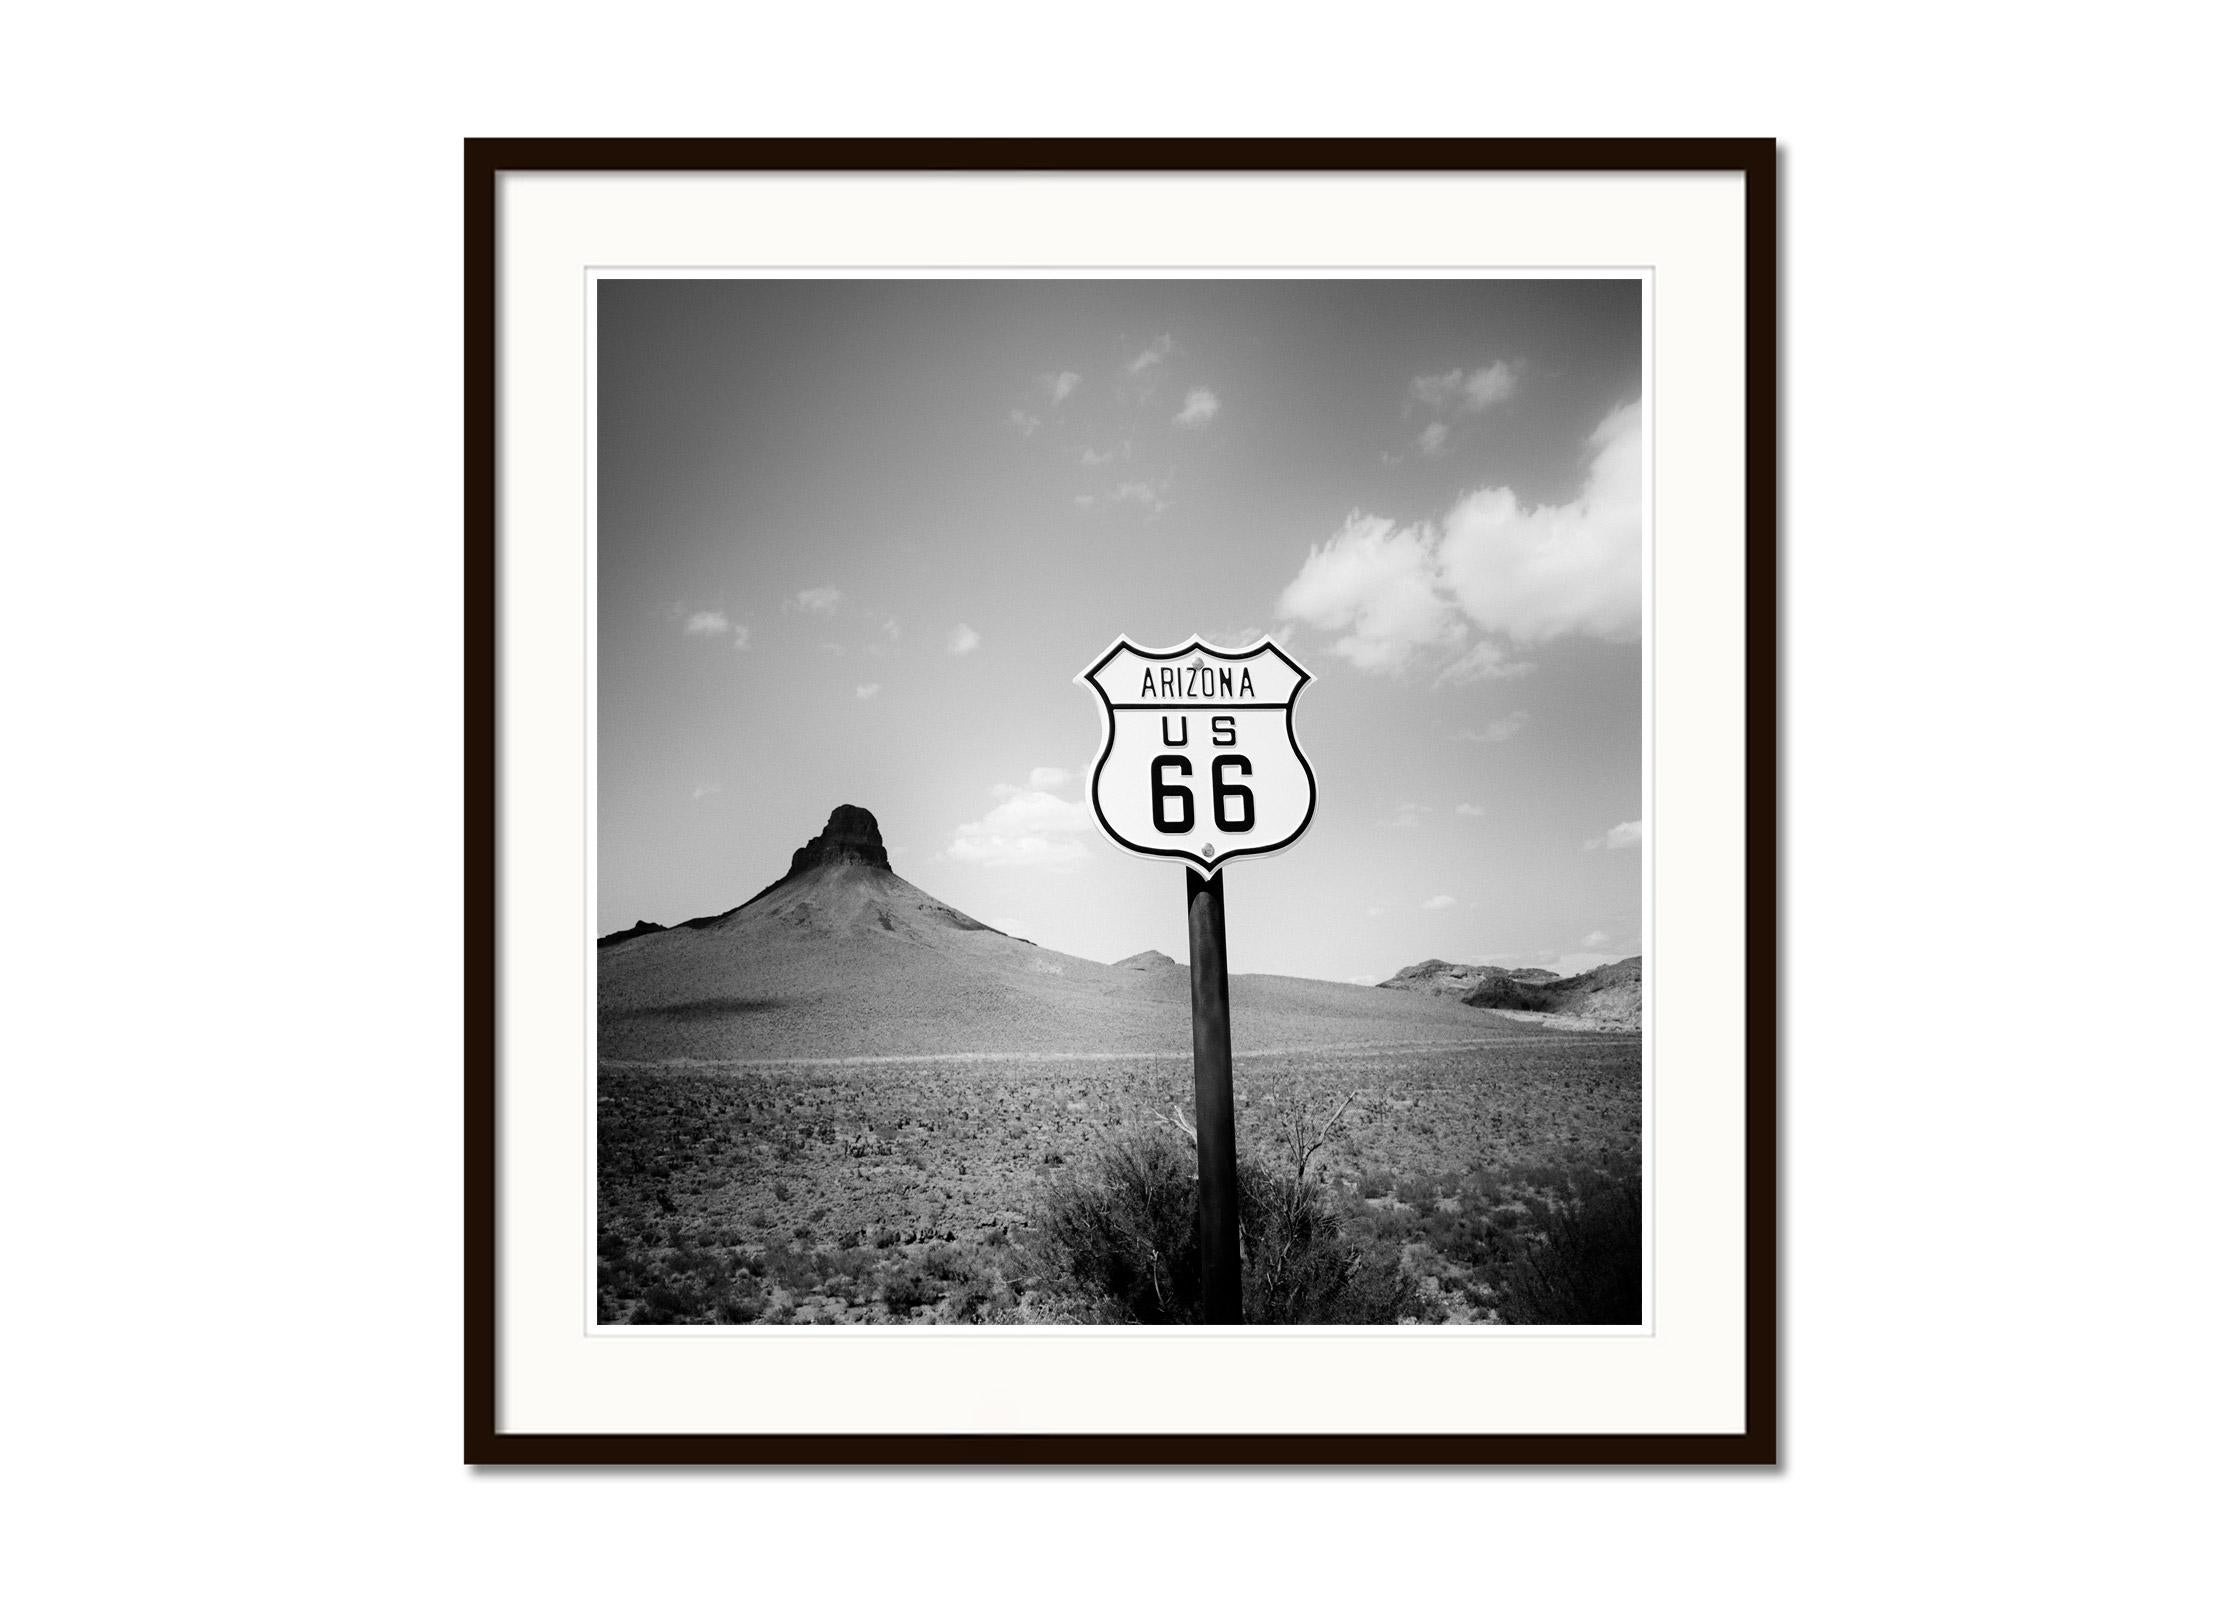 ARIZONA US 66, USA, black and white photography landscape fine art print - Gray Black and White Photograph by Gerald Berghammer